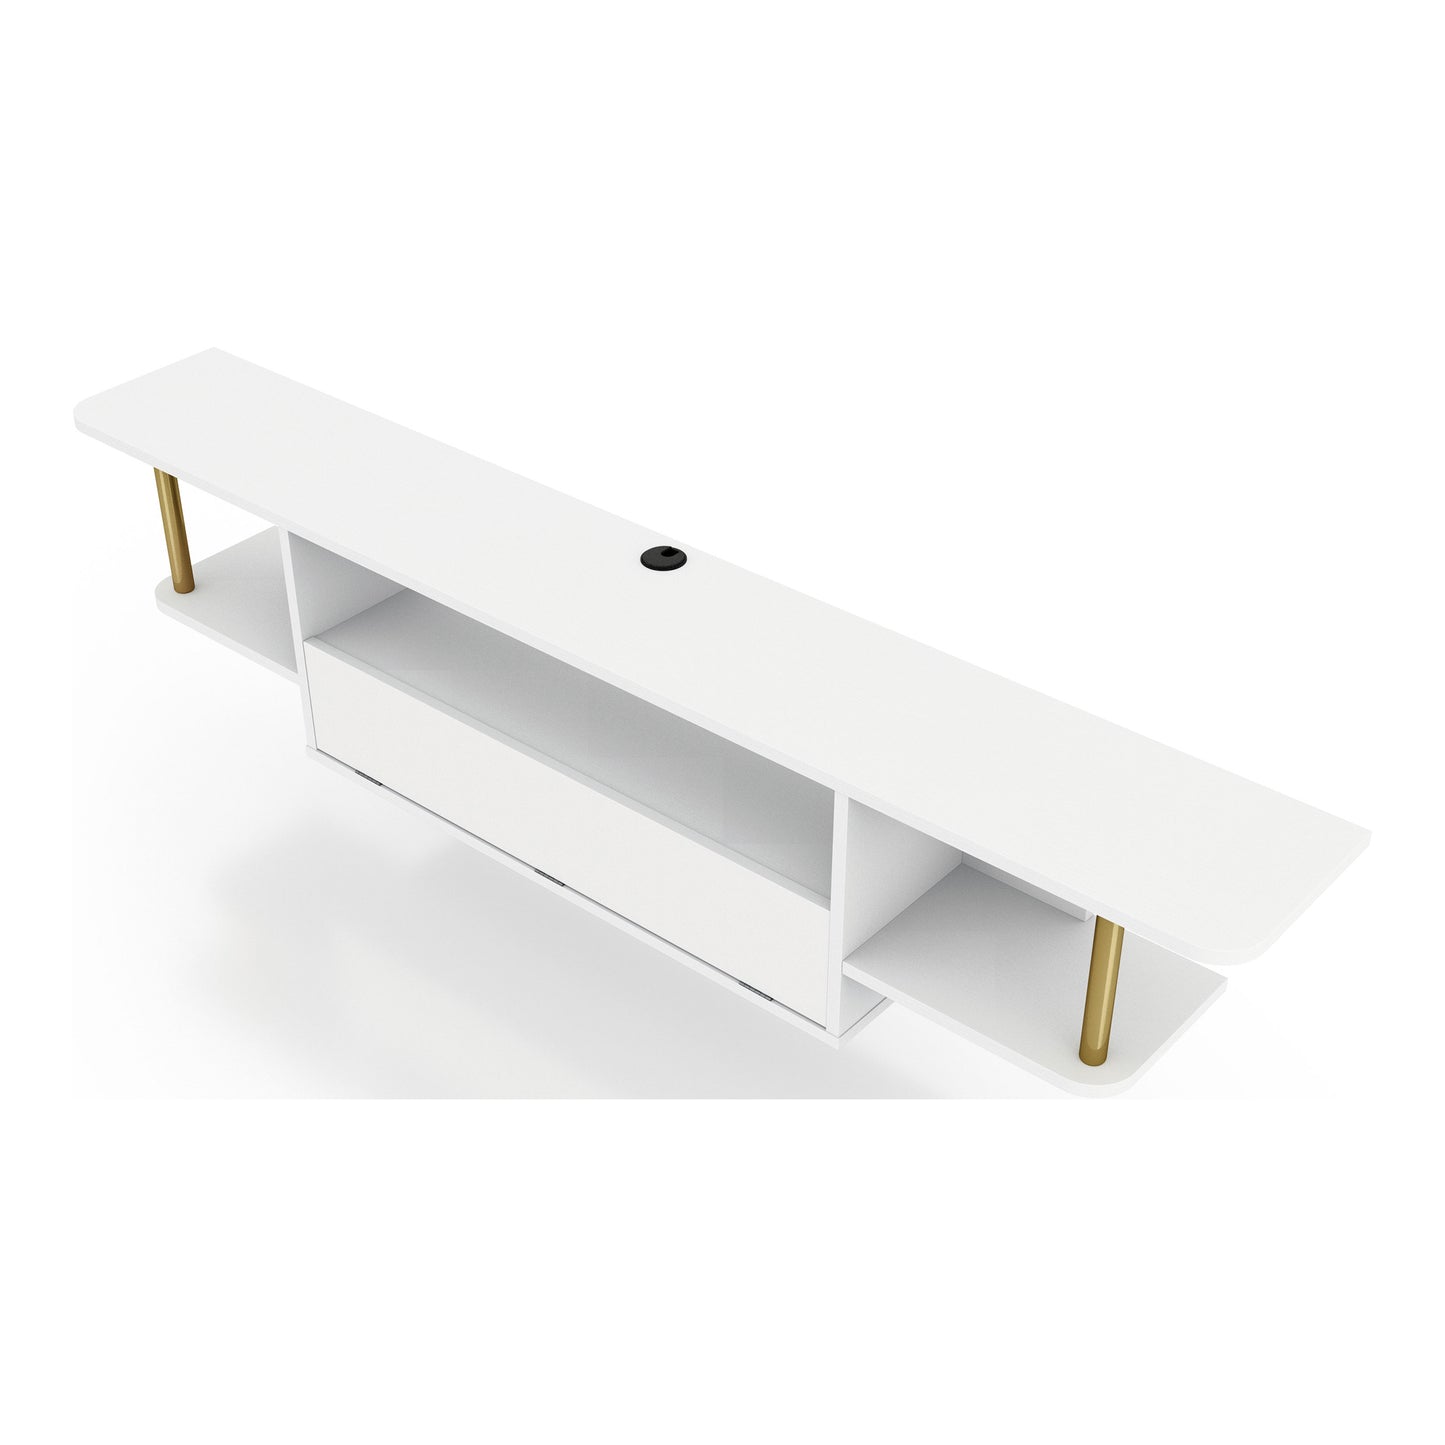 Left angled bird's eye view of a modern white and gold three-shelf floating TV stand on a white background